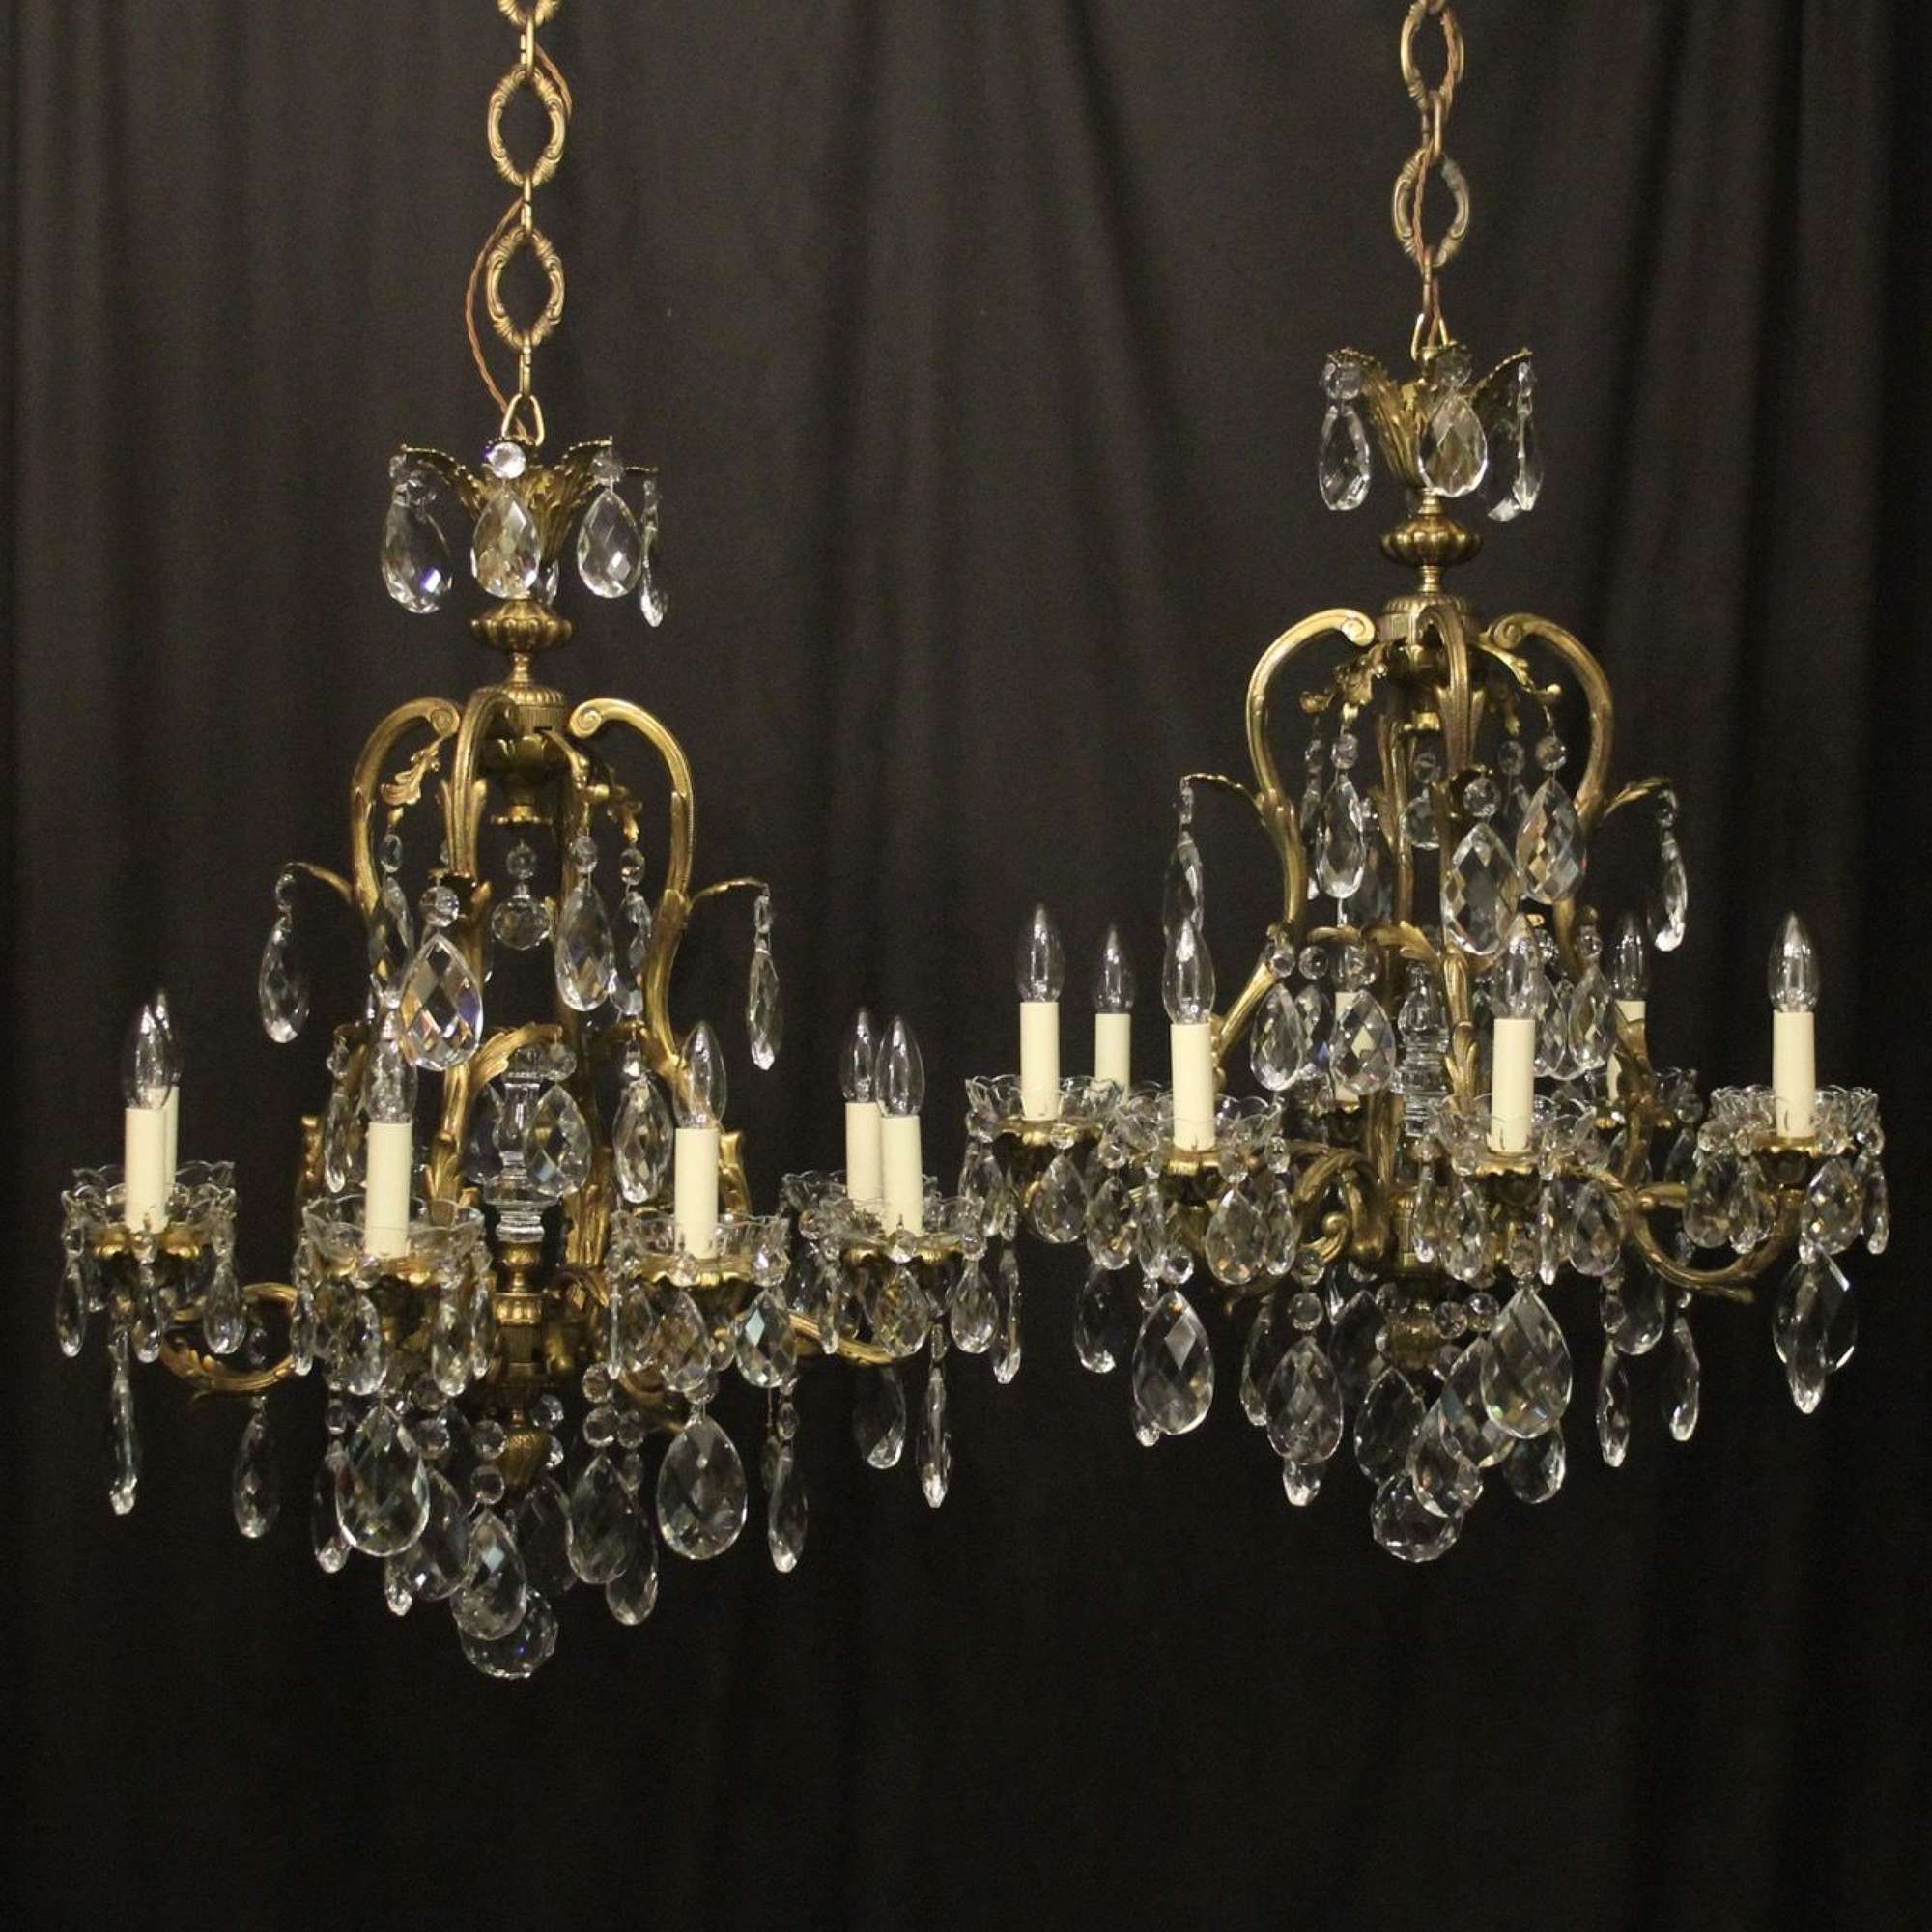 French Pair Bronze 8 Light Antique Chandeliers